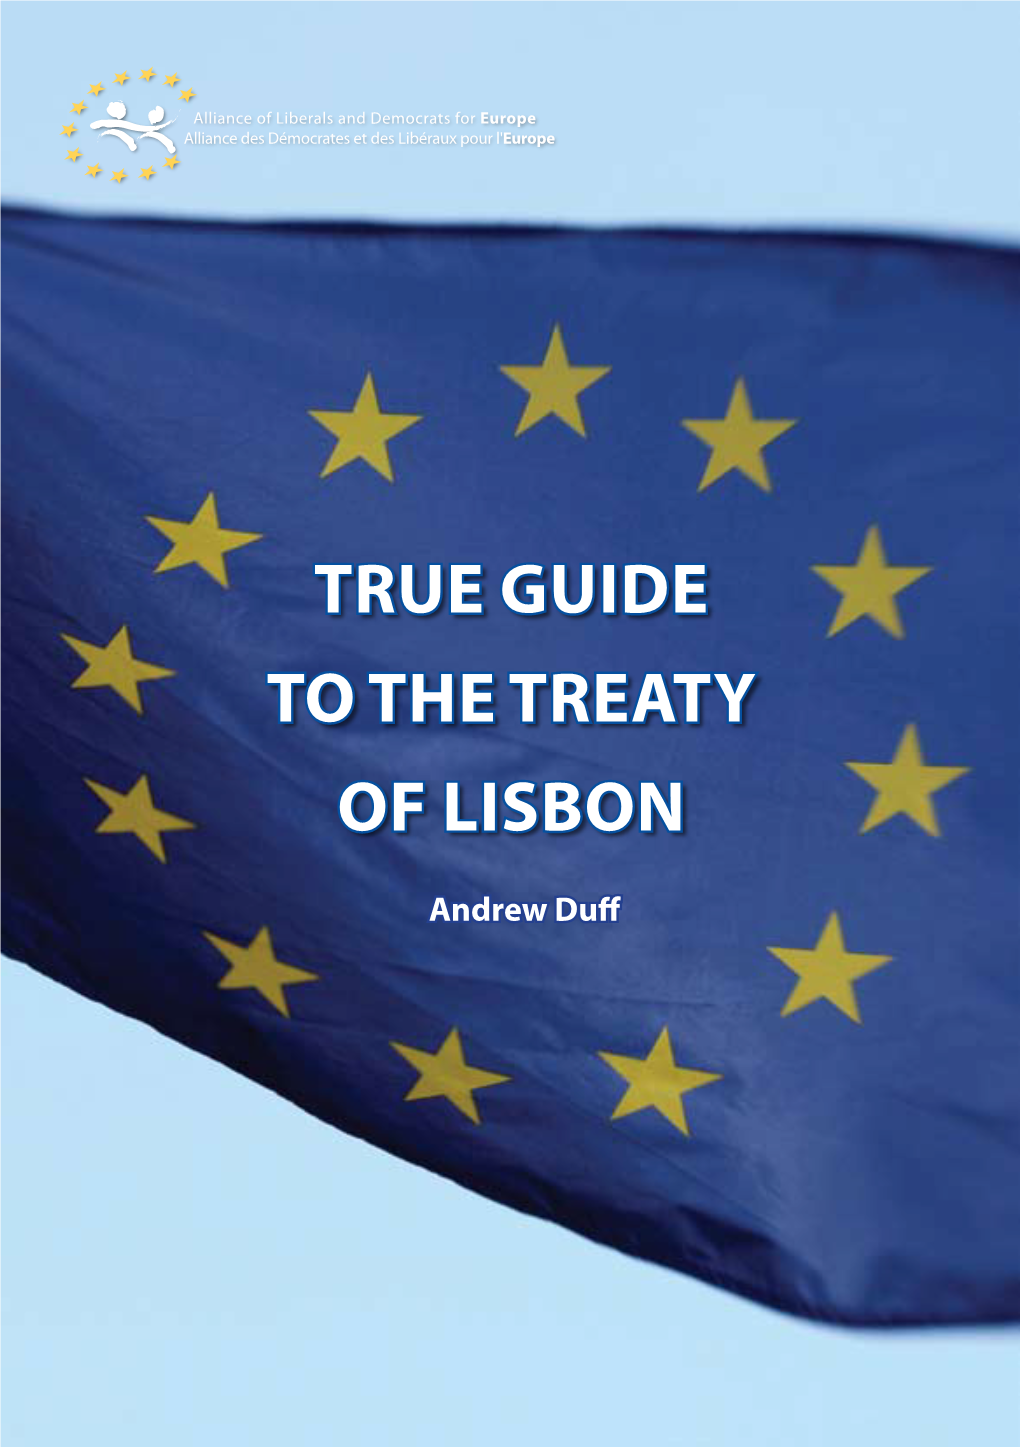 True Guide to the Treaty of Lisbon